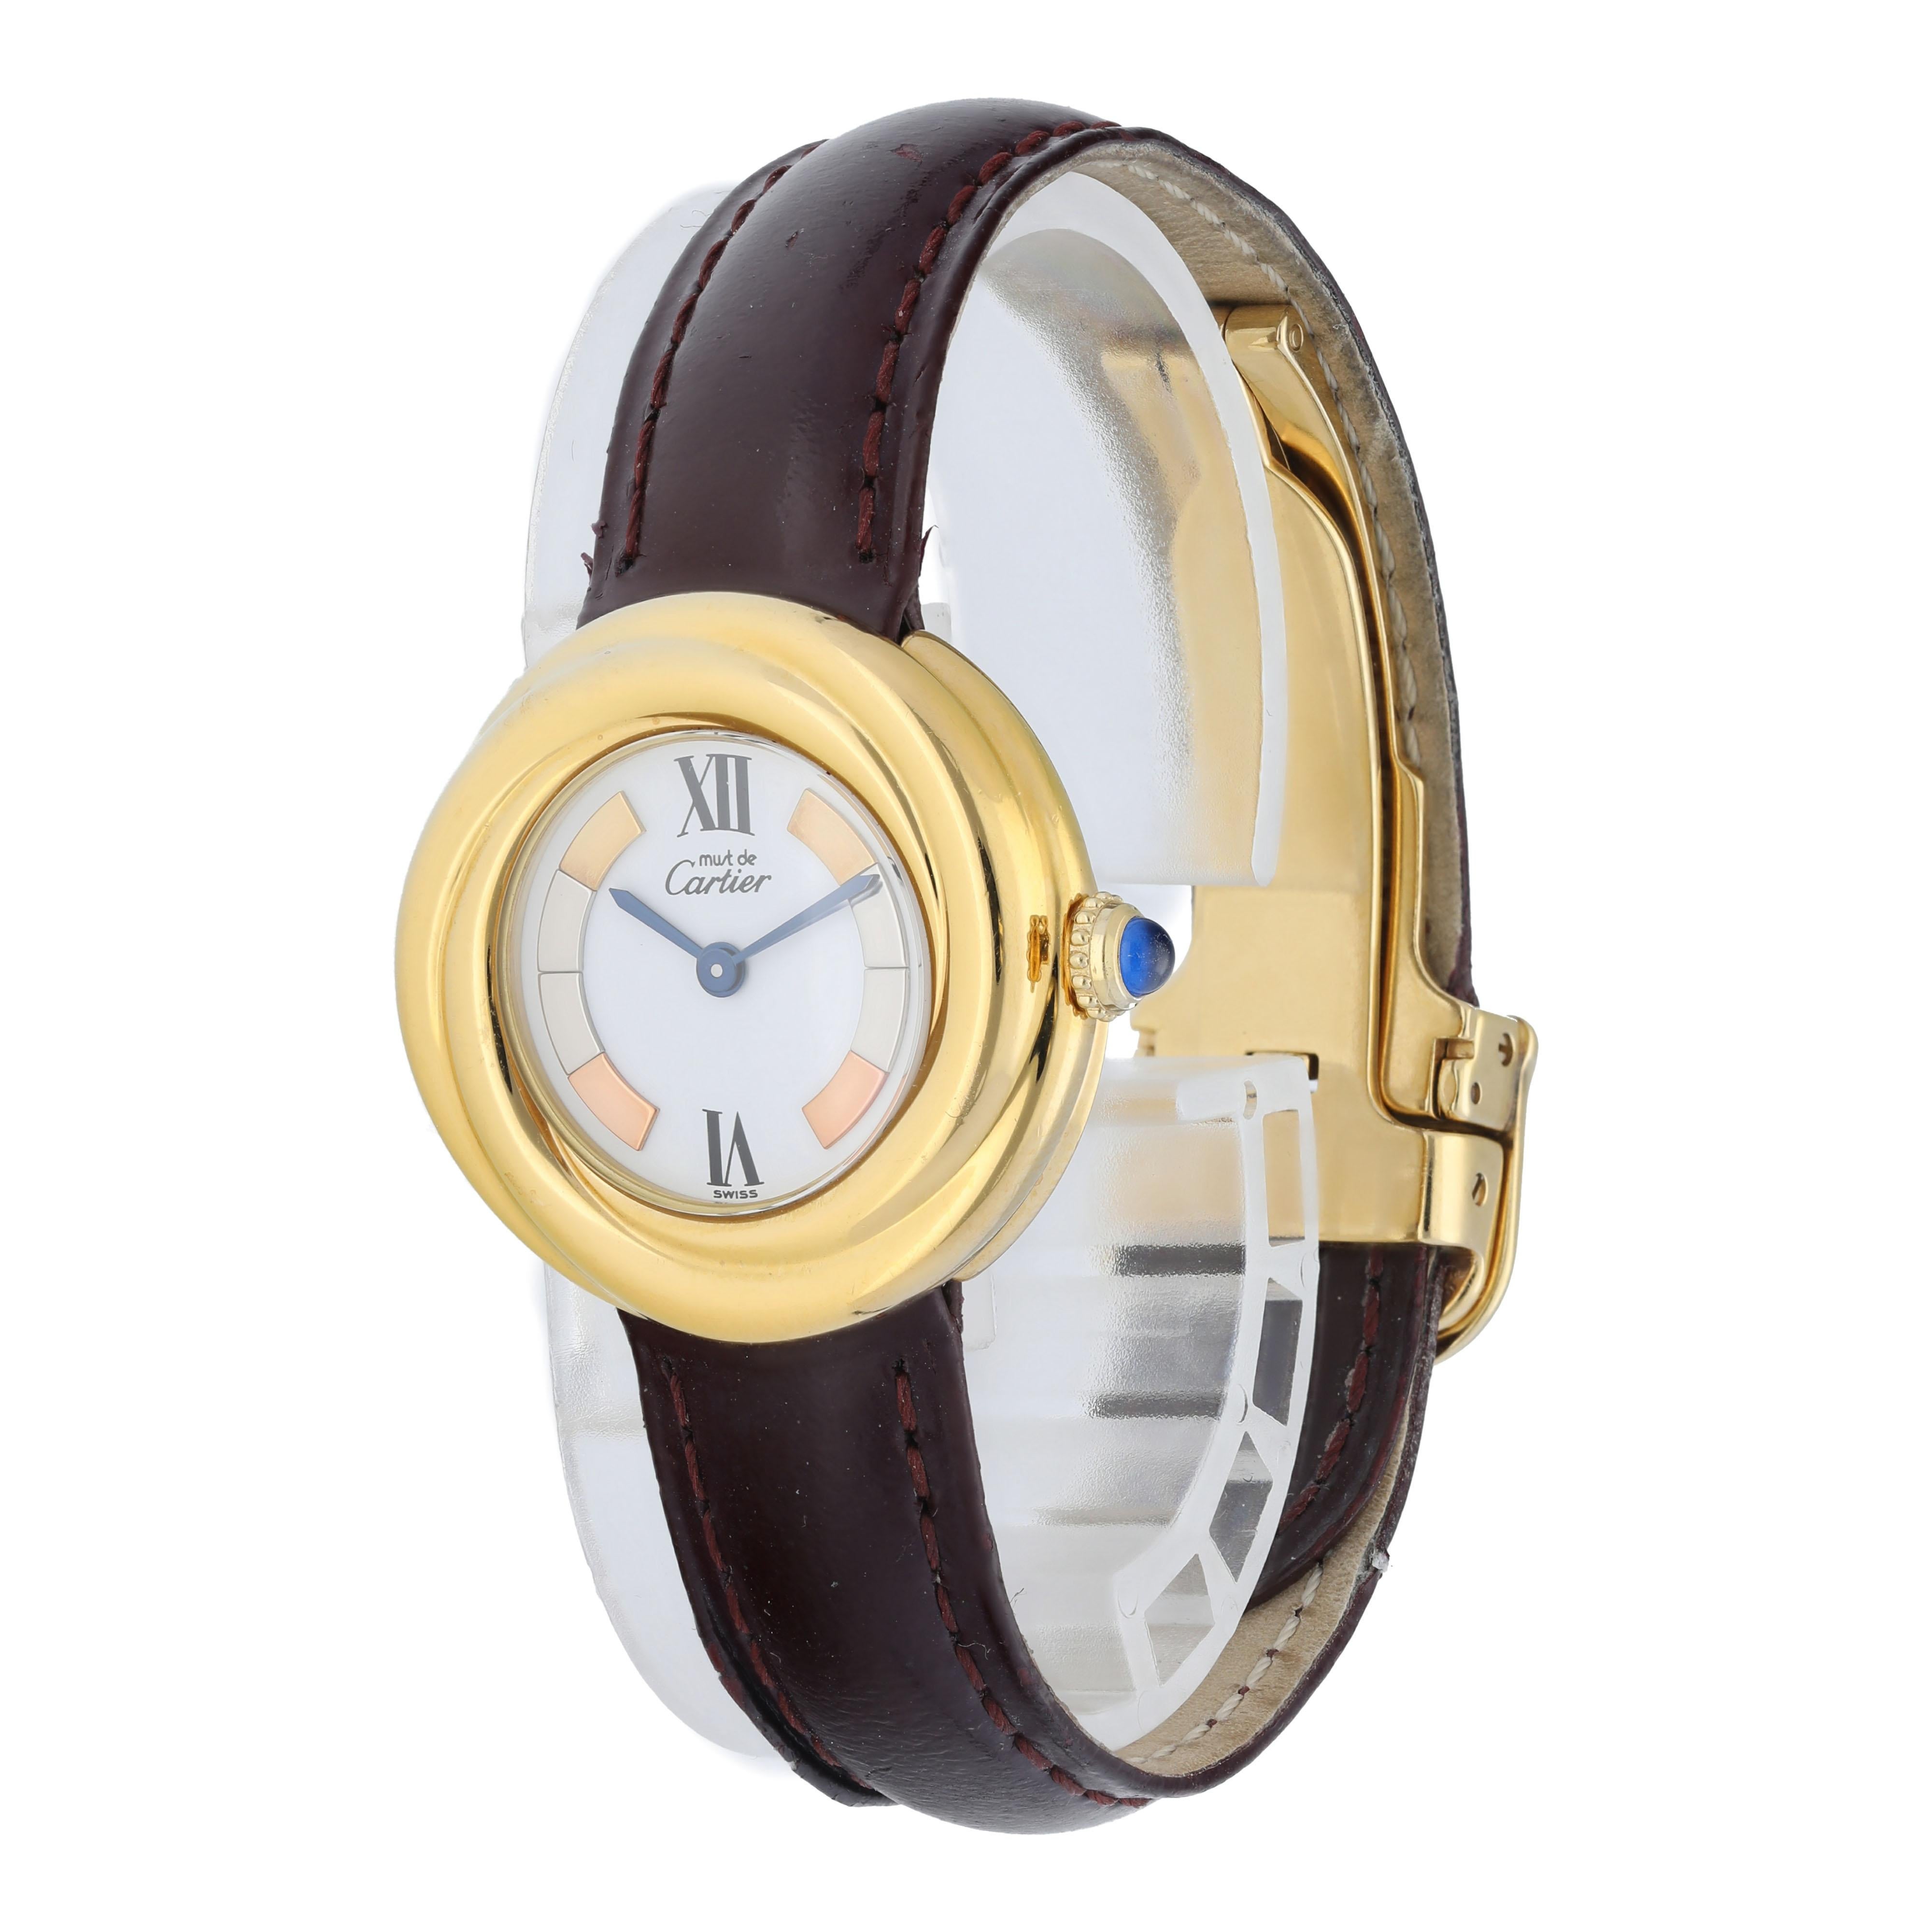 Cartier Vermeil 2735 Must de Cartier Ladies Watch. 
27mm Gold Plated case. 
Gold Plaited smooth bezel. 
Off-White Trinity Color dial with Blue steel hands and Roman numeral hour markers. 
Burgundy Leather Strap with Deployment Buckle. 
Will fit up